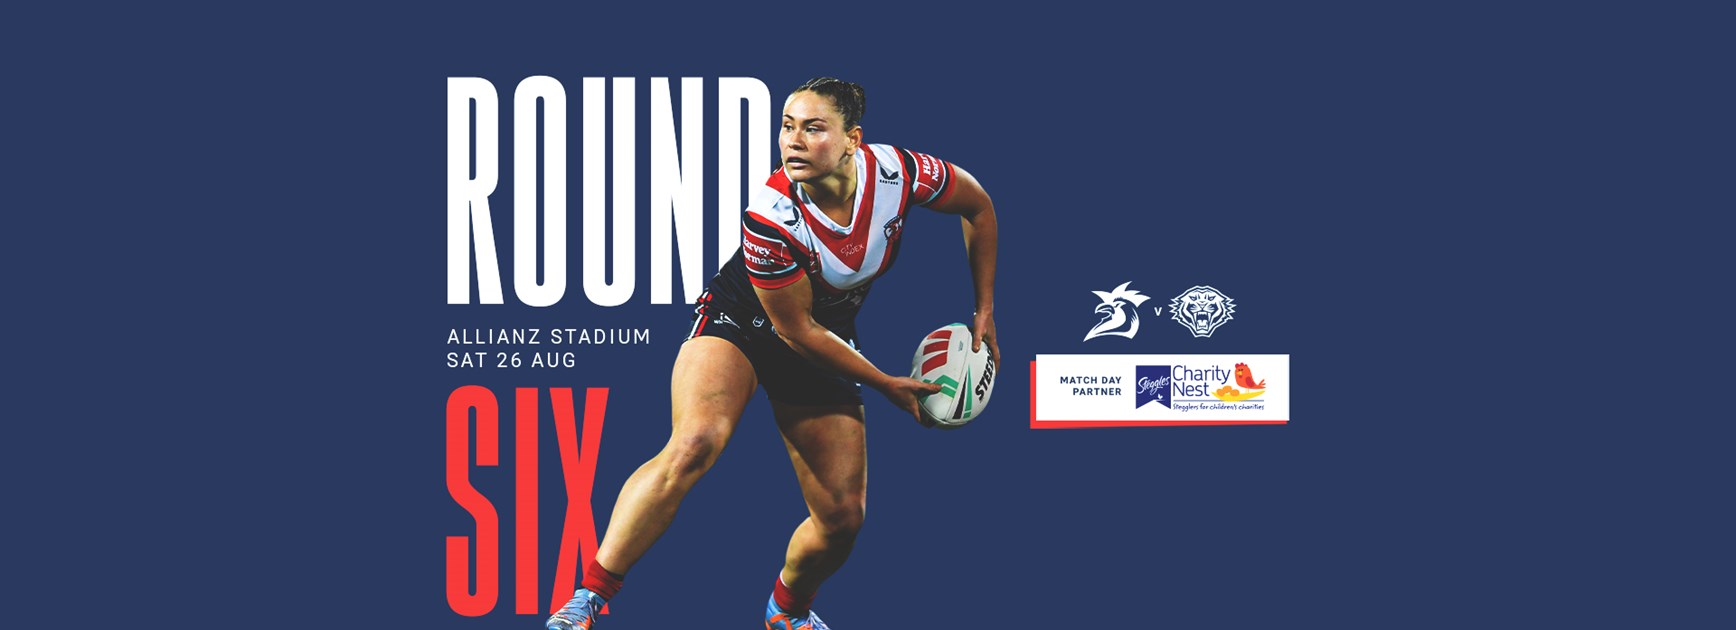 NRLW Line Up for Round 6 vs Tigers